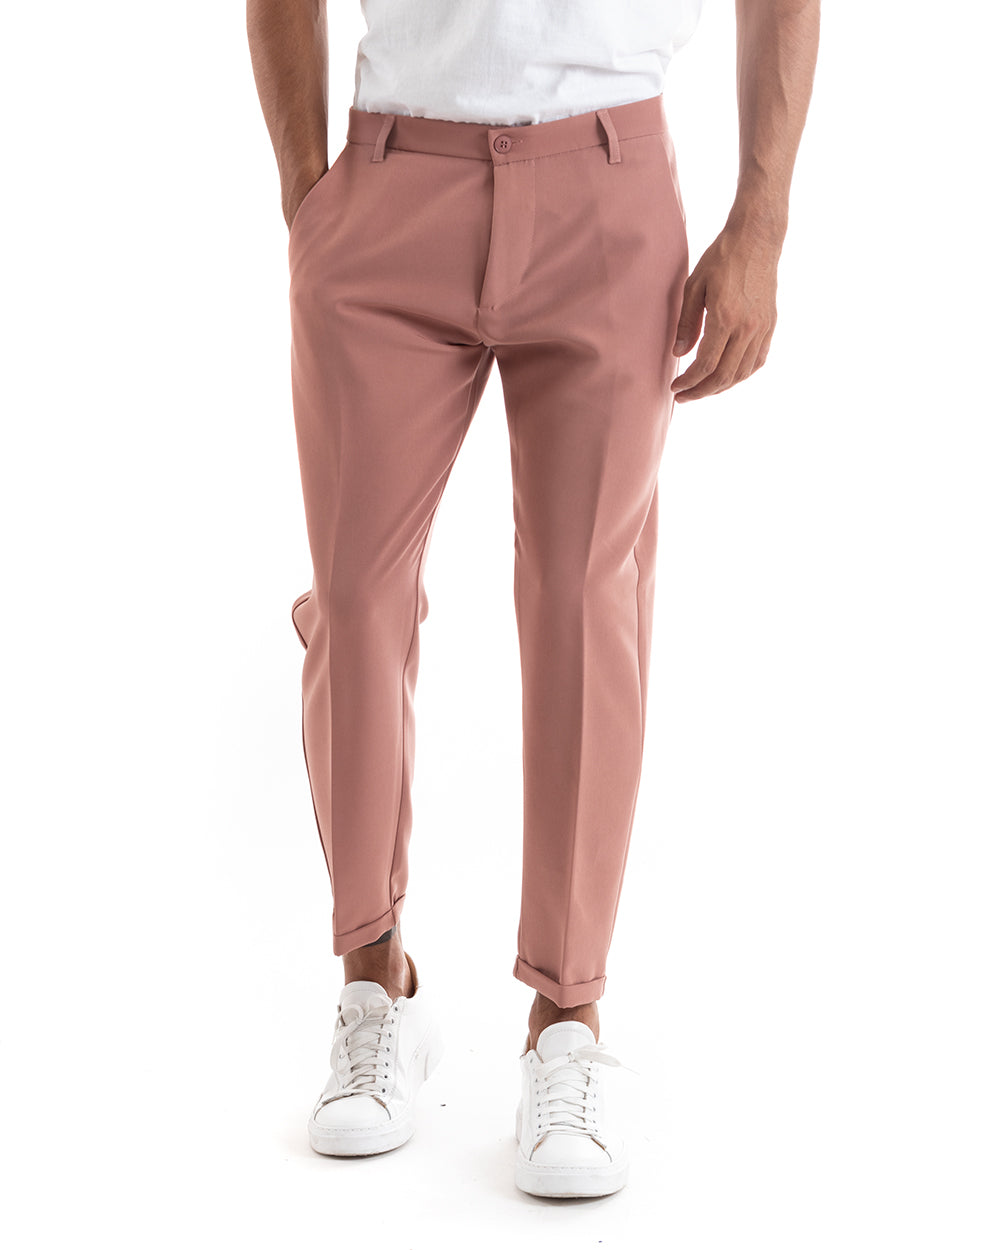 Double-Breasted Men's Suit Viscose Suit Suit Jacket Trousers Pink Elegant Ceremony GIOSAL-OU2164A